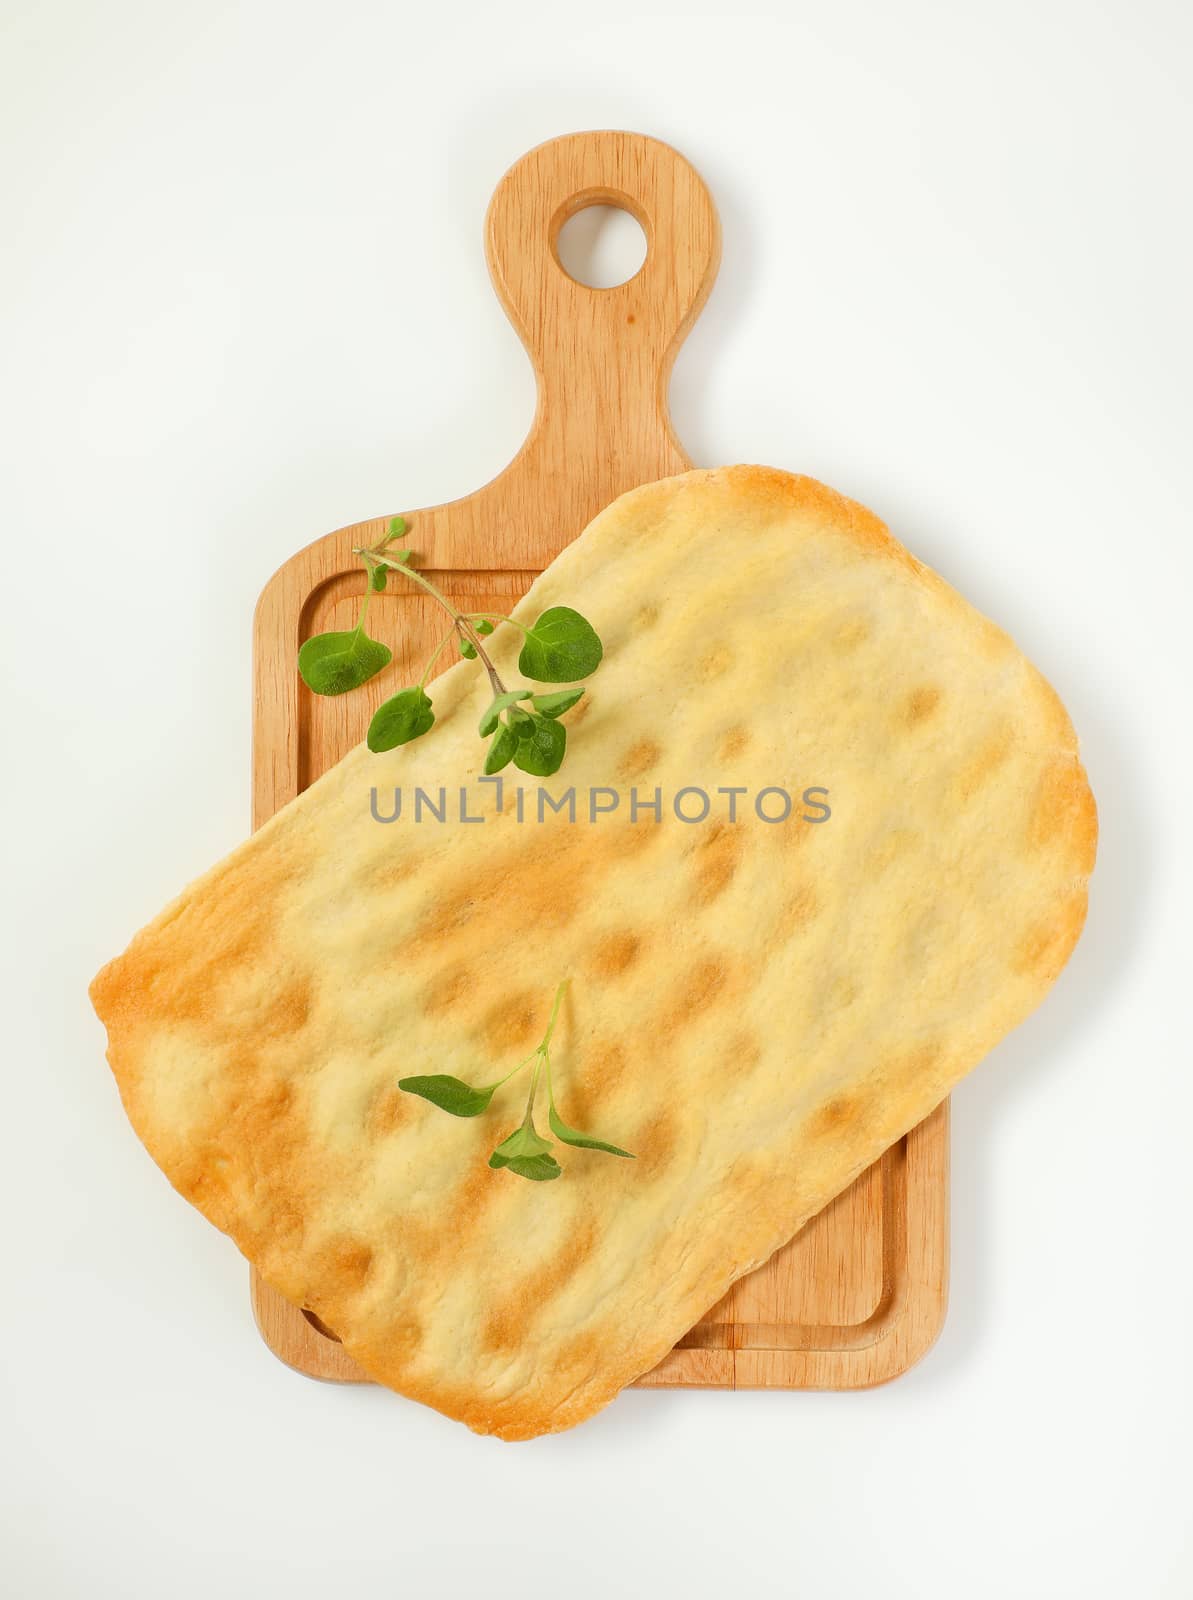 piece of traditional Tuscan flatbread (Ghiottina Toscana) on wooden cutting board